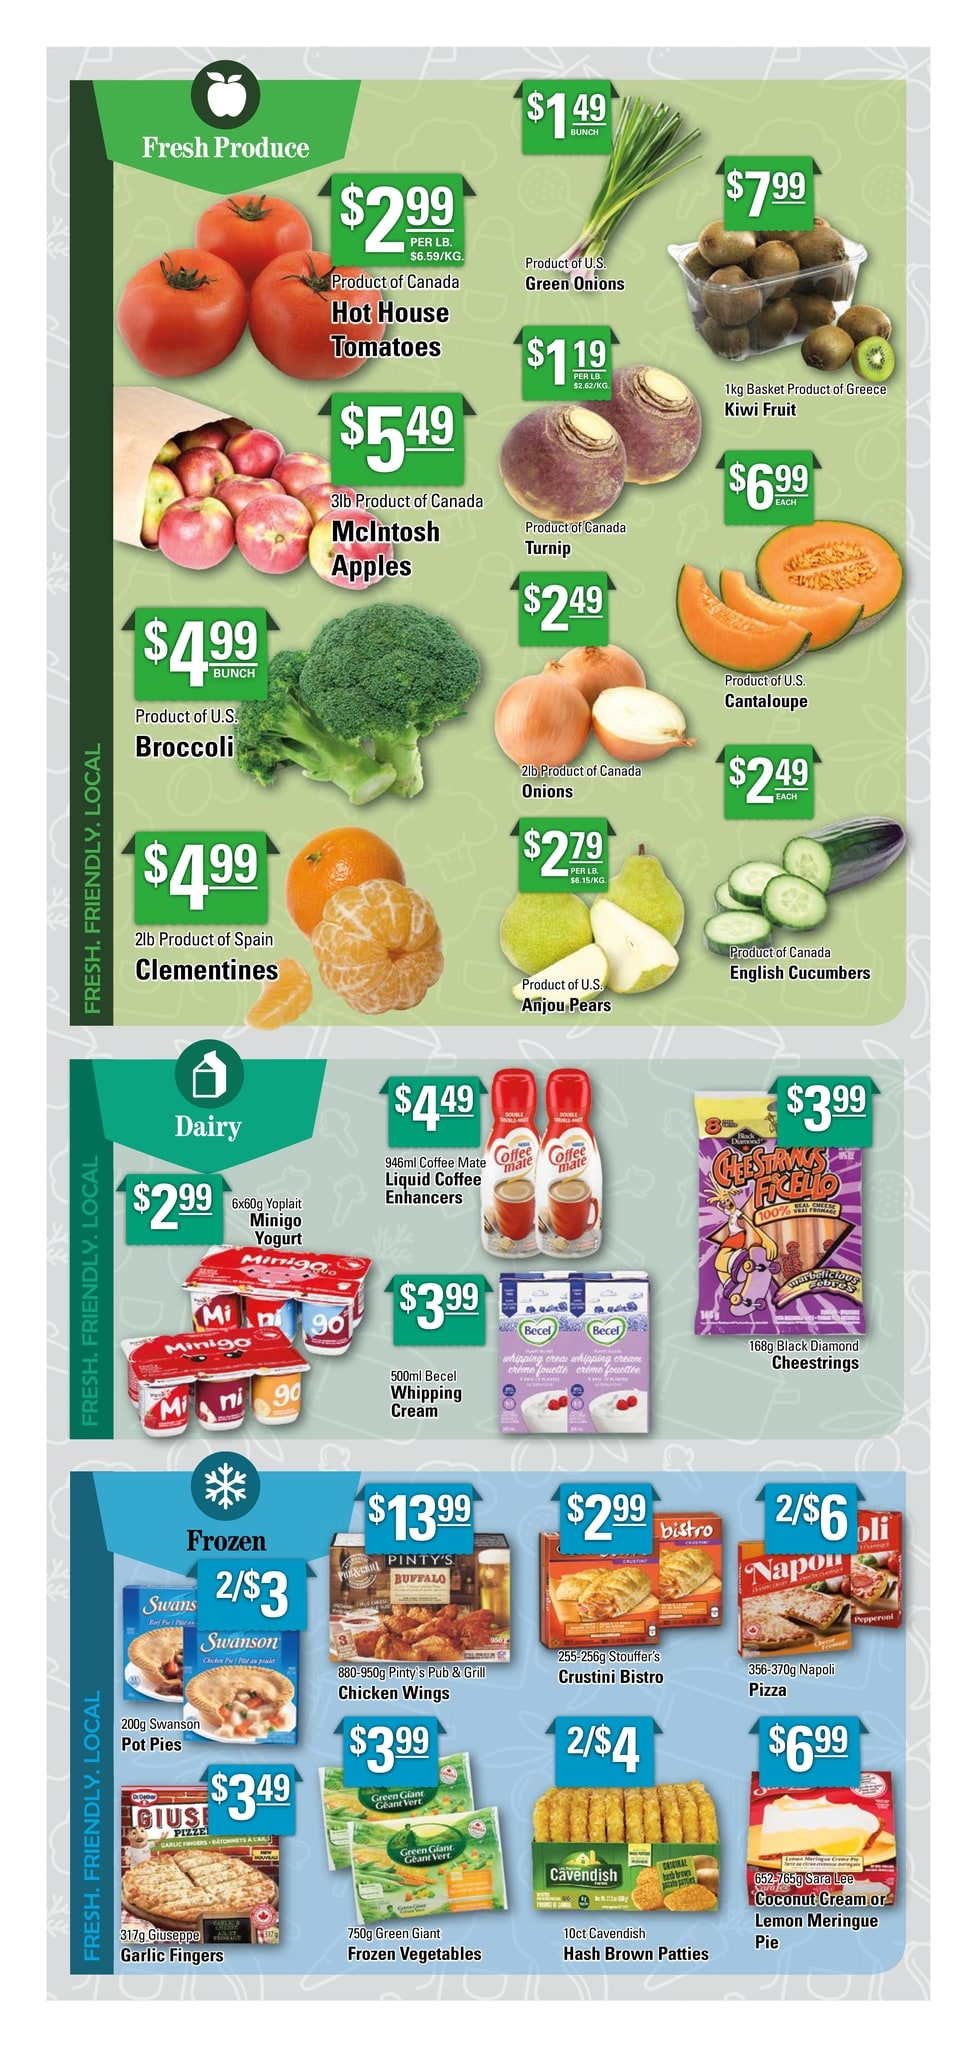 Powell's Supermarket - Weekly Flyer Specials - Page 5